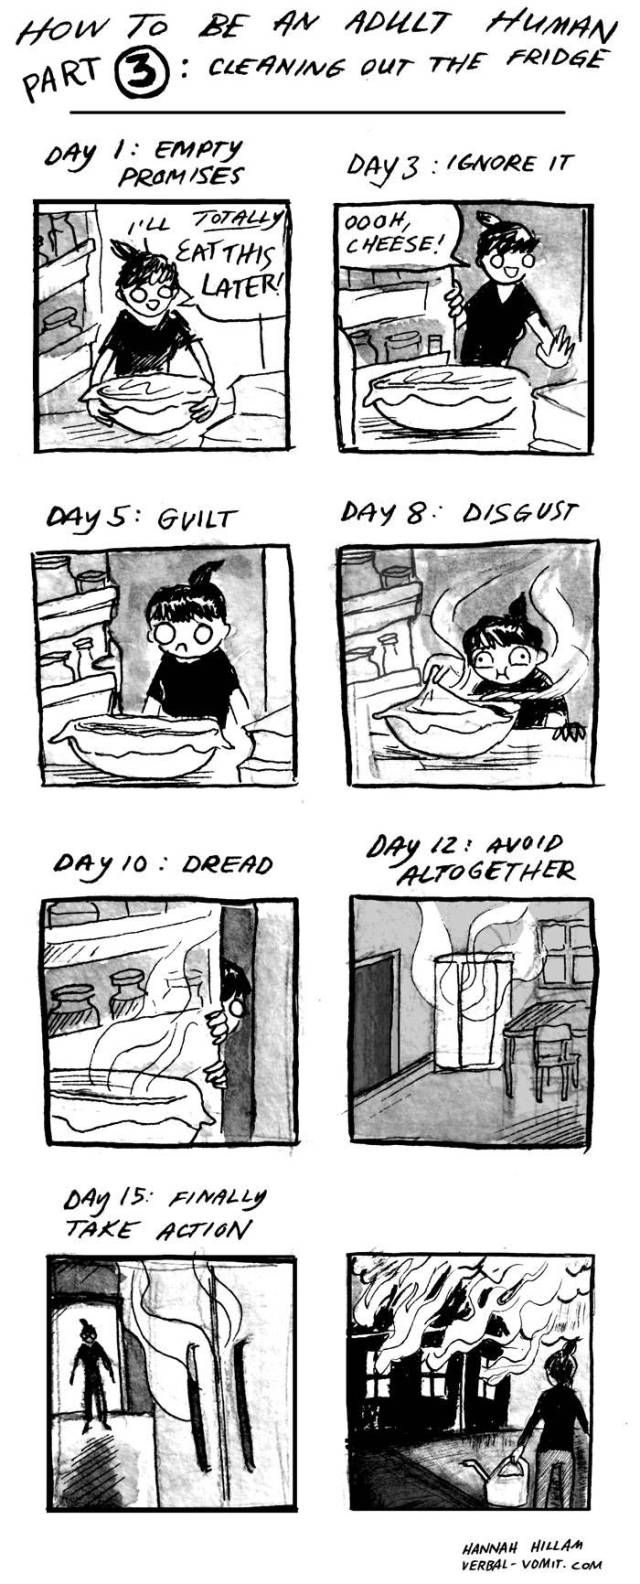 Hilarious Cartoons That Capture The Experience Of Becoming An Adult (50 pics)